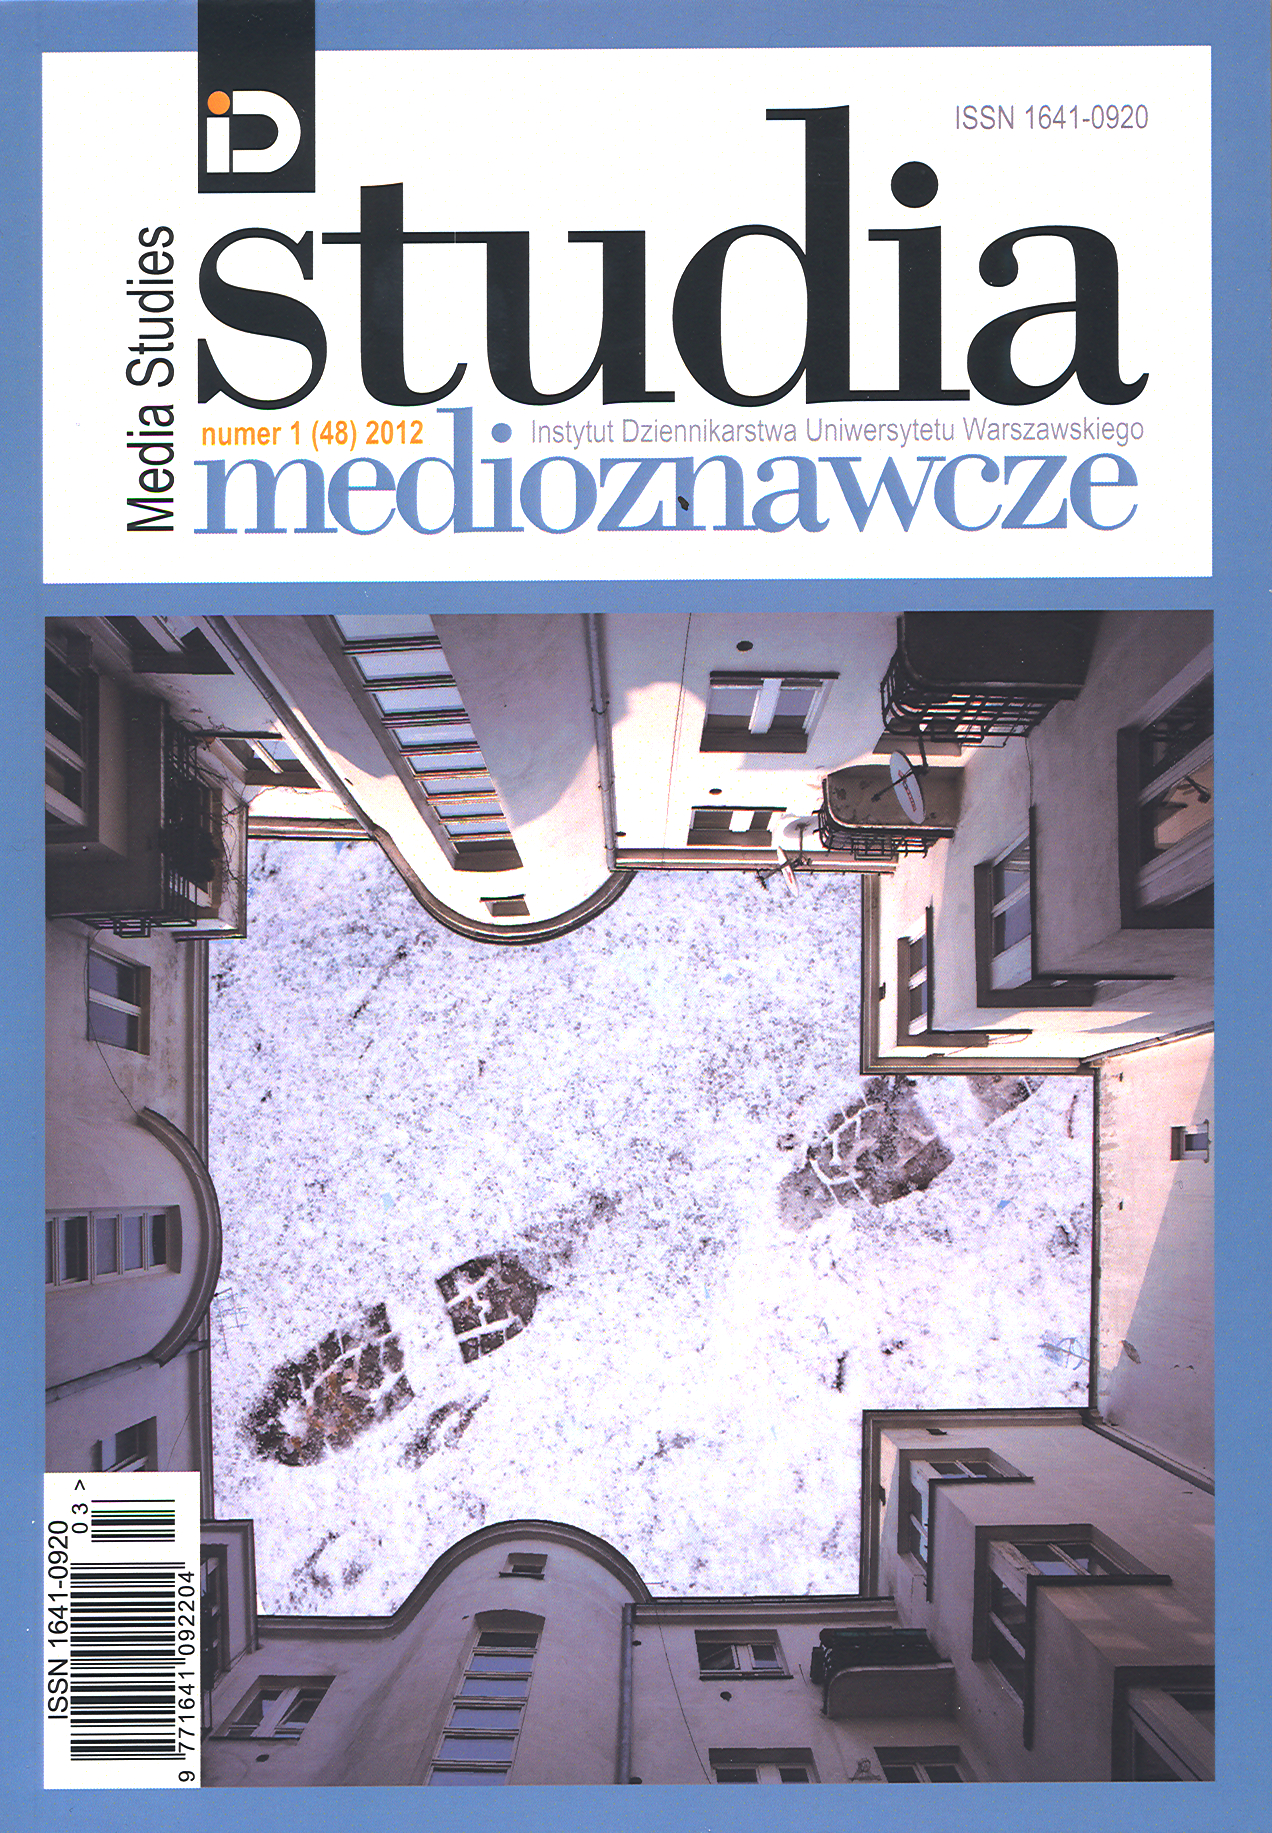 Aldona Skudrzyk, Krystyna Urban, Small Homelands. Linguistic and Cultural Awareness of Local Communities Cover Image